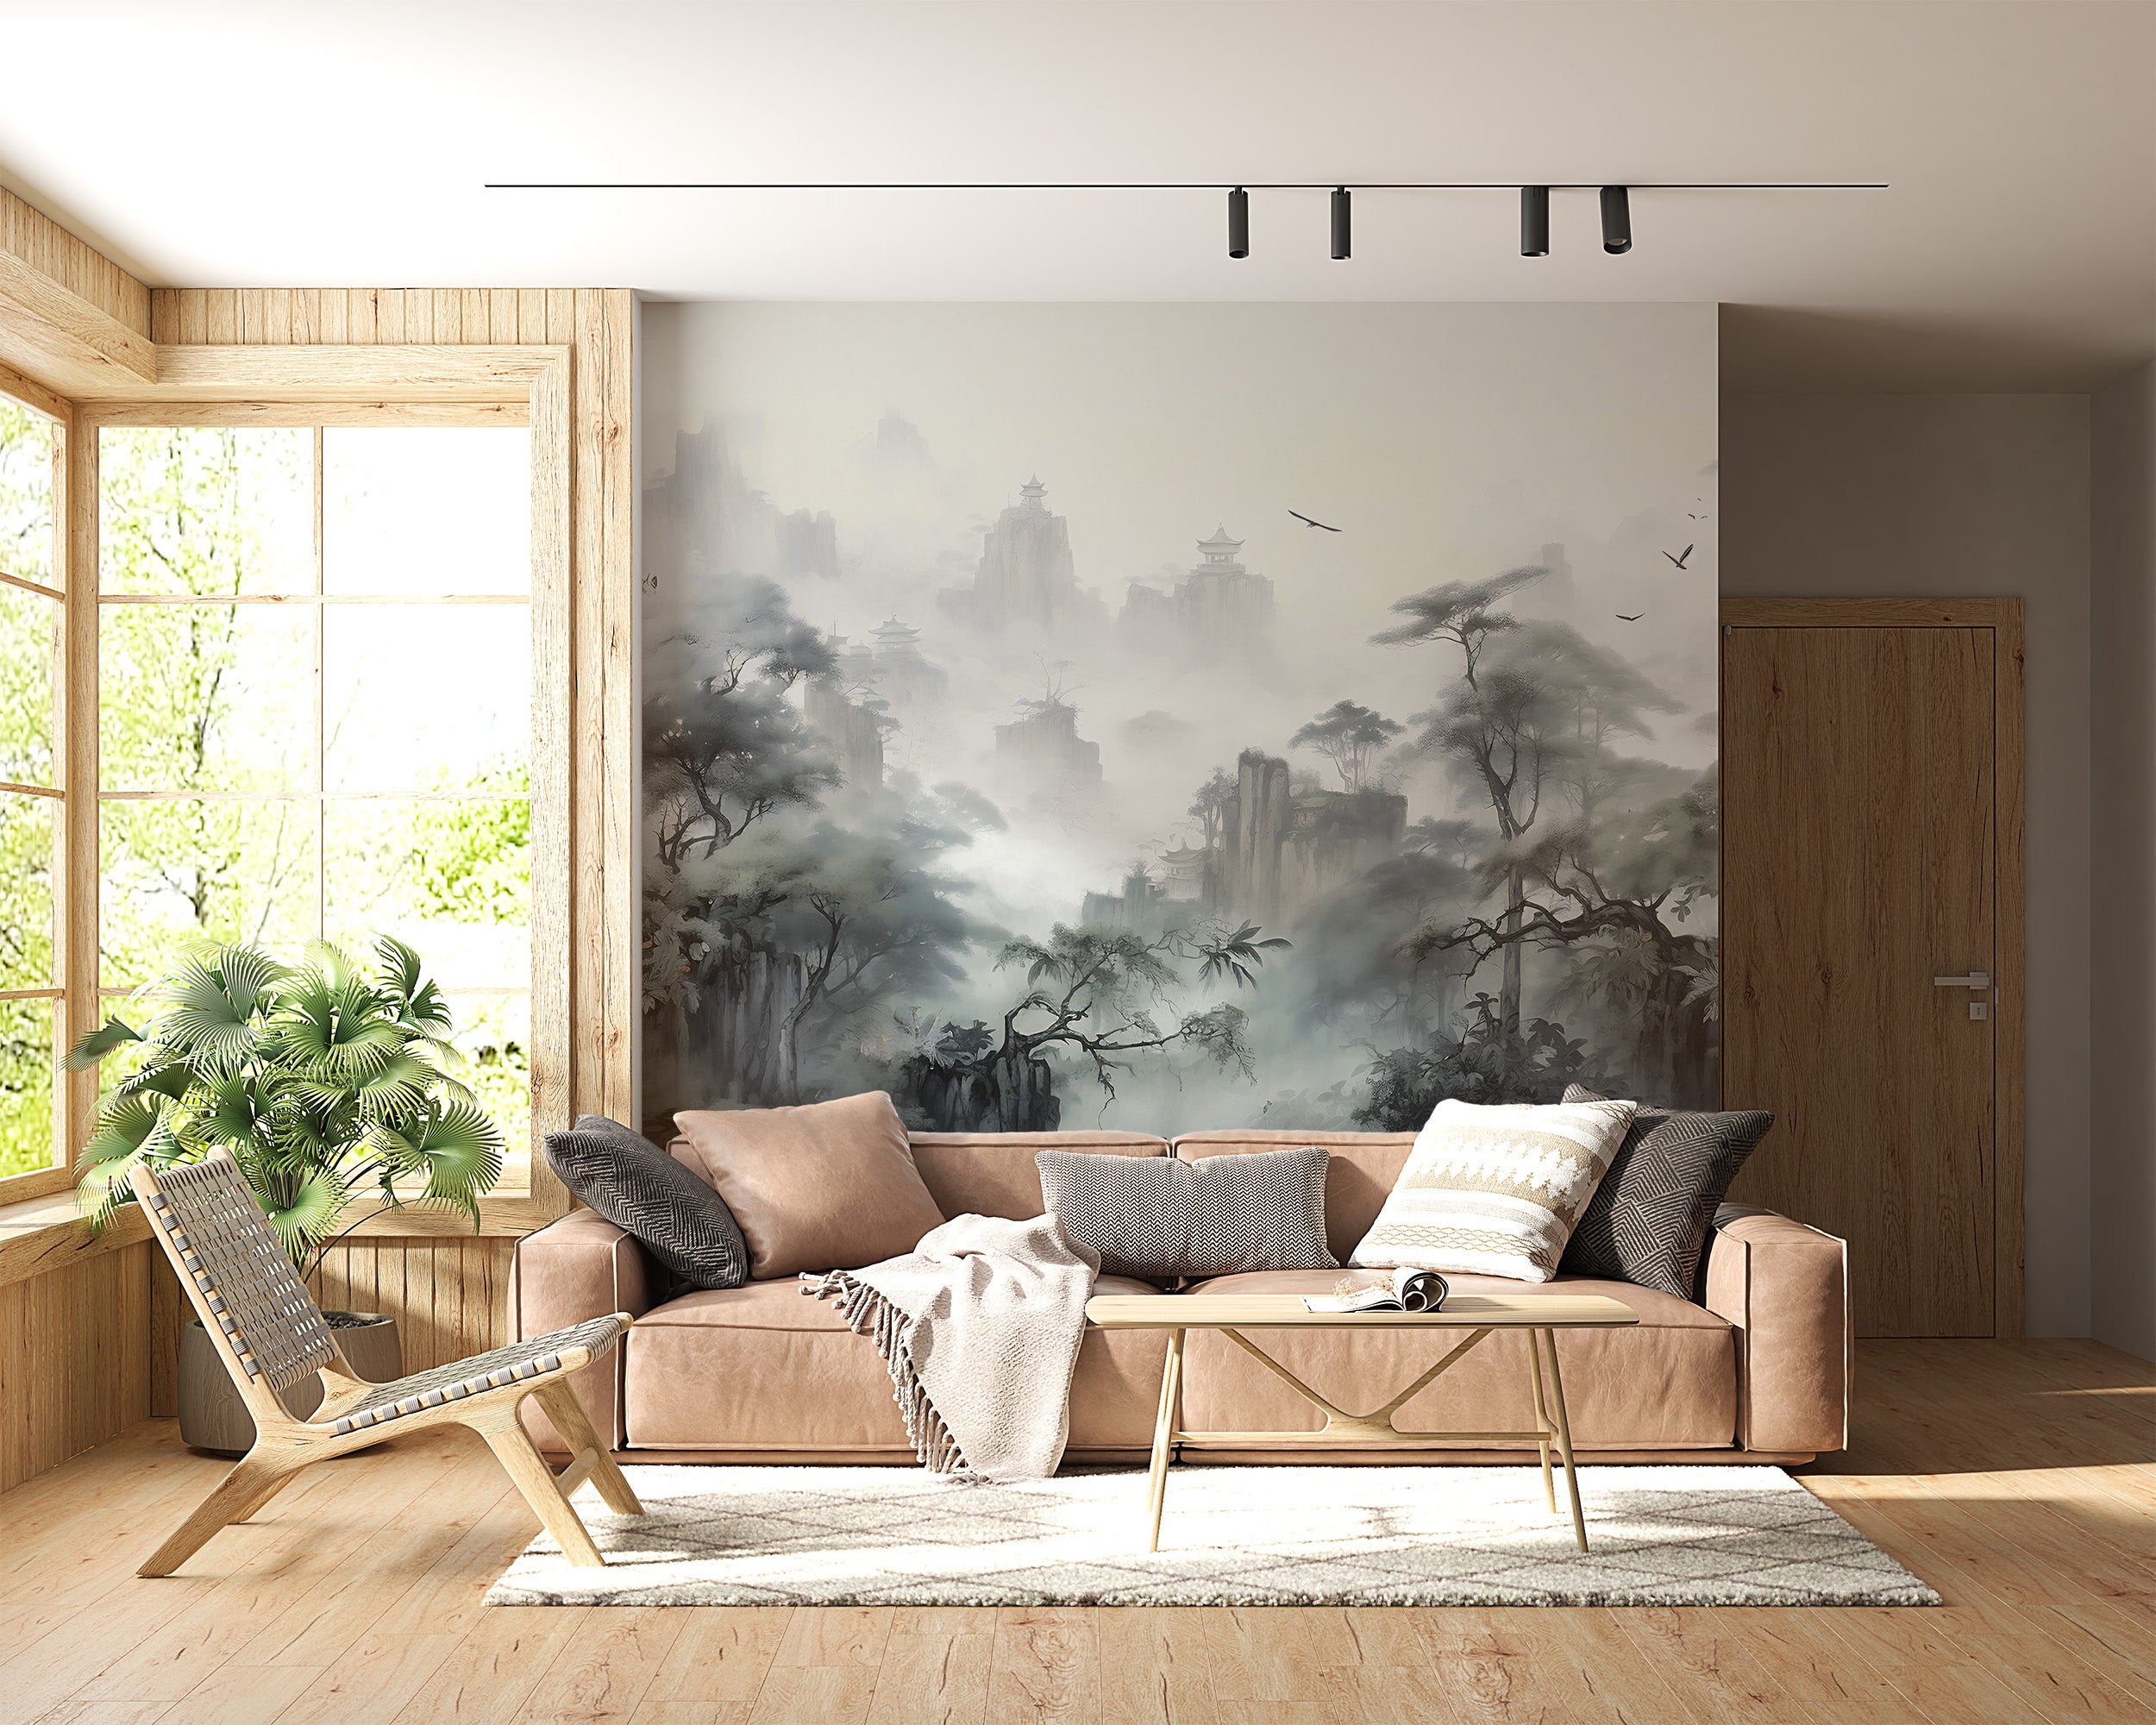 Transform Your Room with Monochrome Mural Design